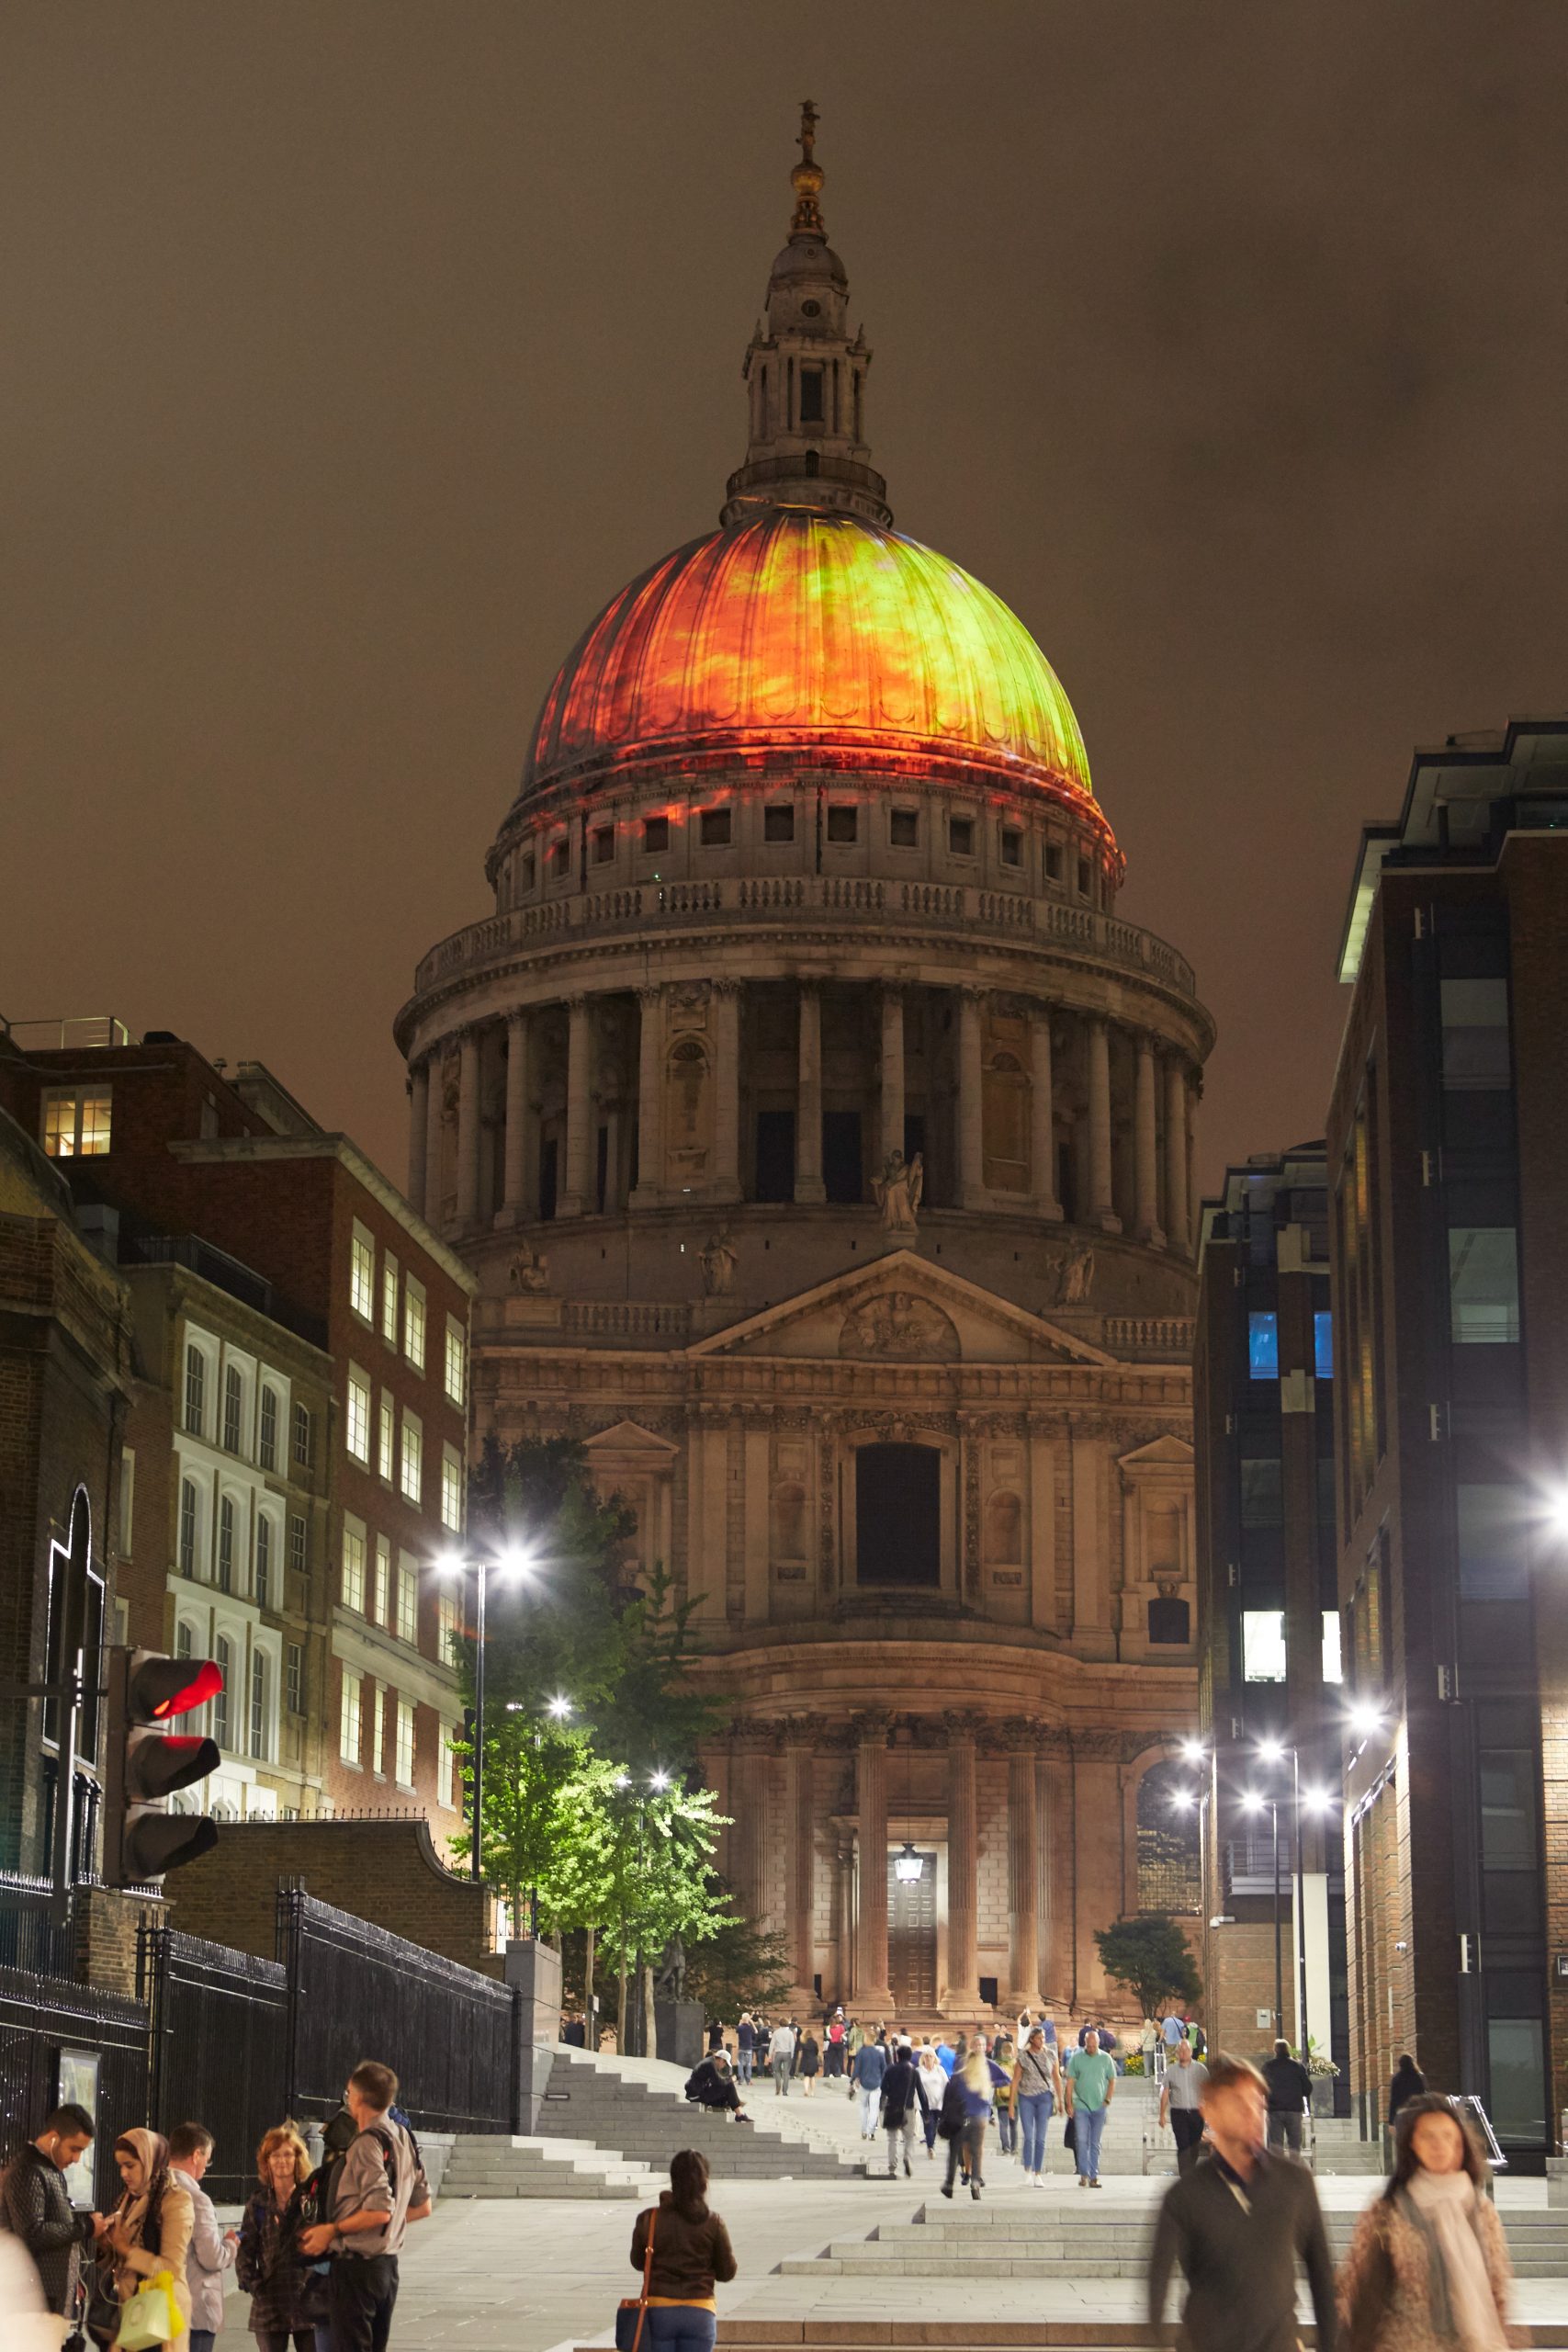 Imagery of flames projected onto the roof of St Pauls Cathedral